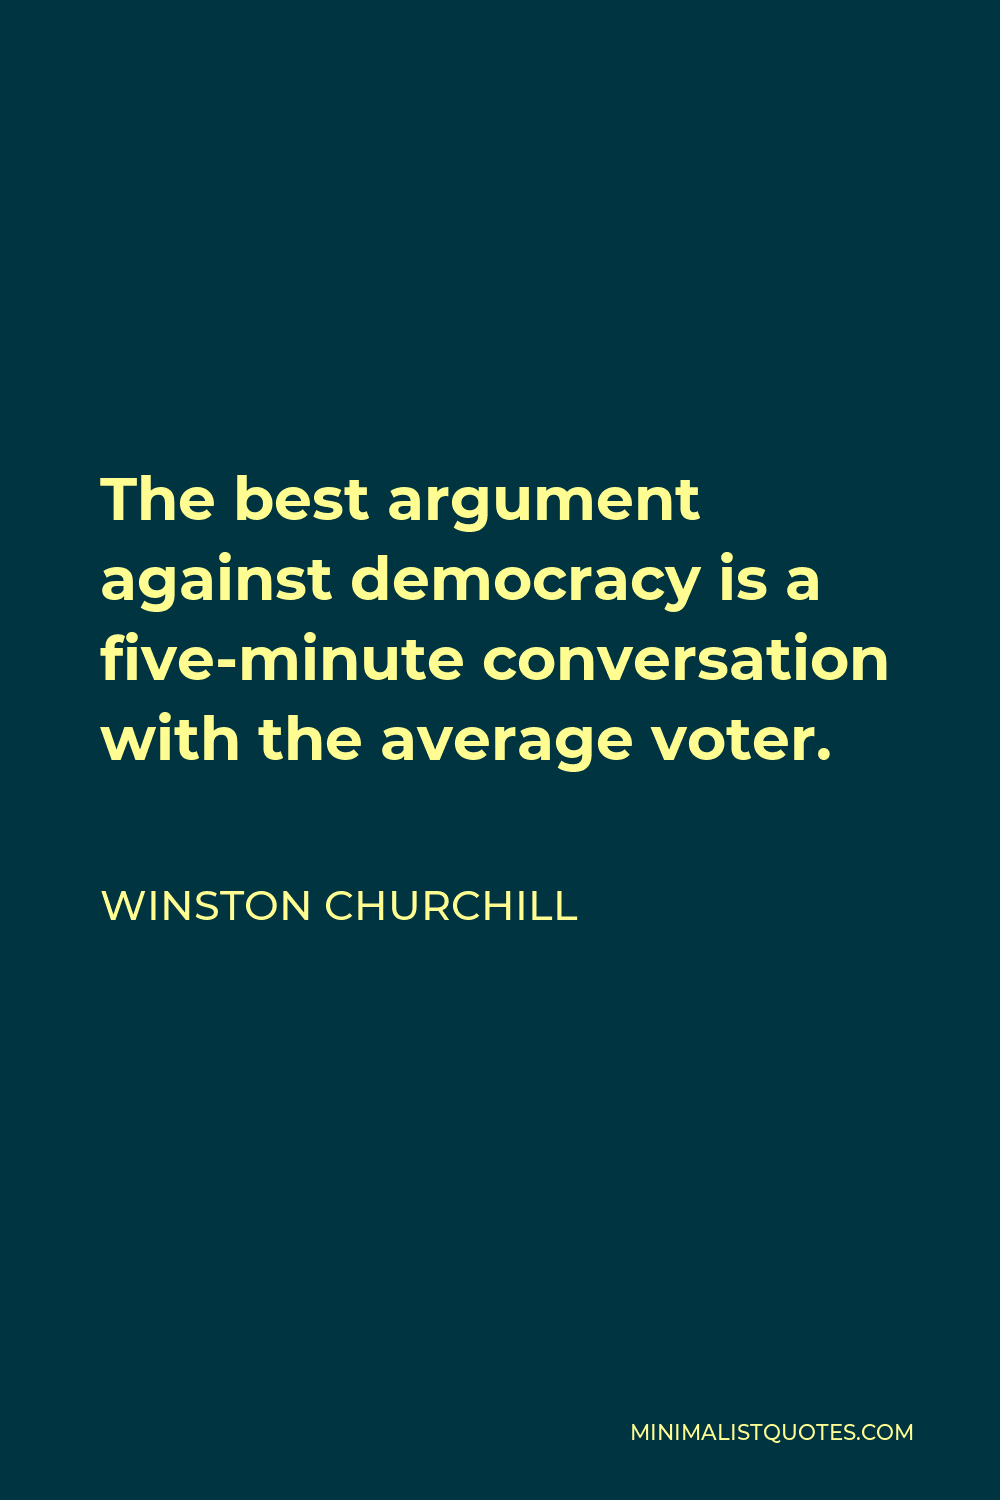 Winston Churchill Quote - The best argument against democracy is a five-minute conversation with the average voter.